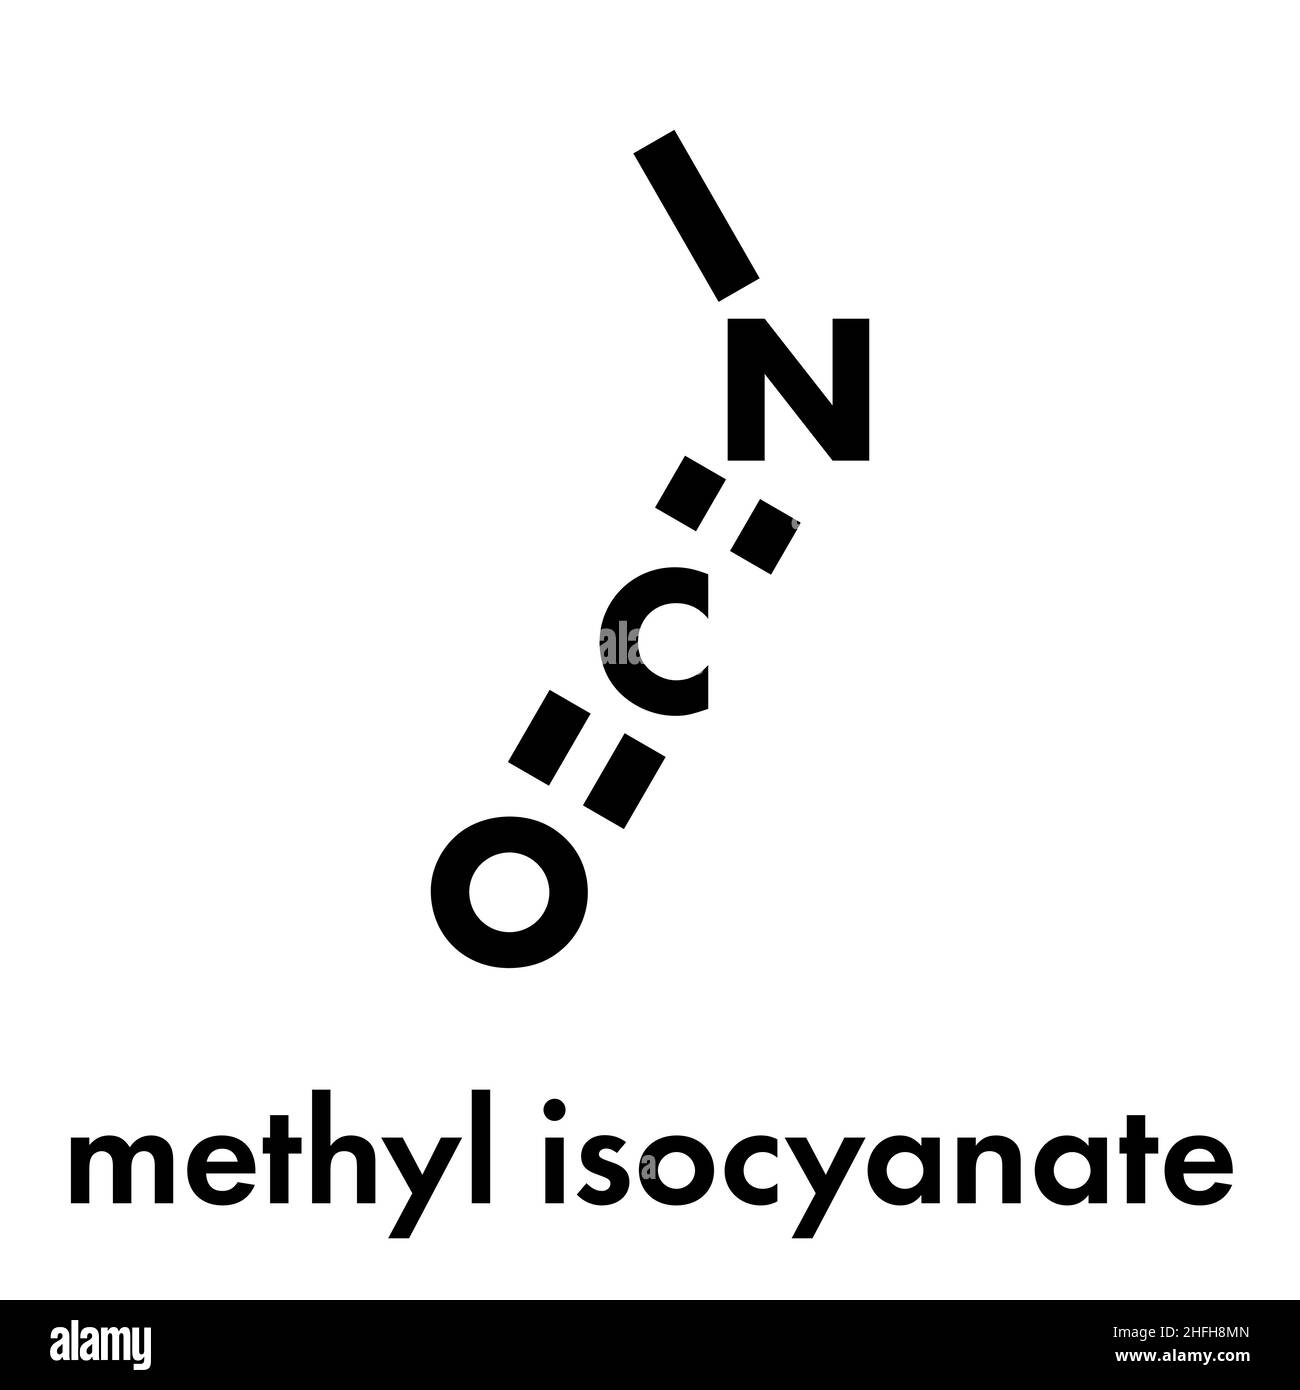 Methyl isocyanate (MIC) toxic molecule. Important chemical that was responsible for thousands of deaths in the Bhopal disaster. Skeletal formula. Stock Vector